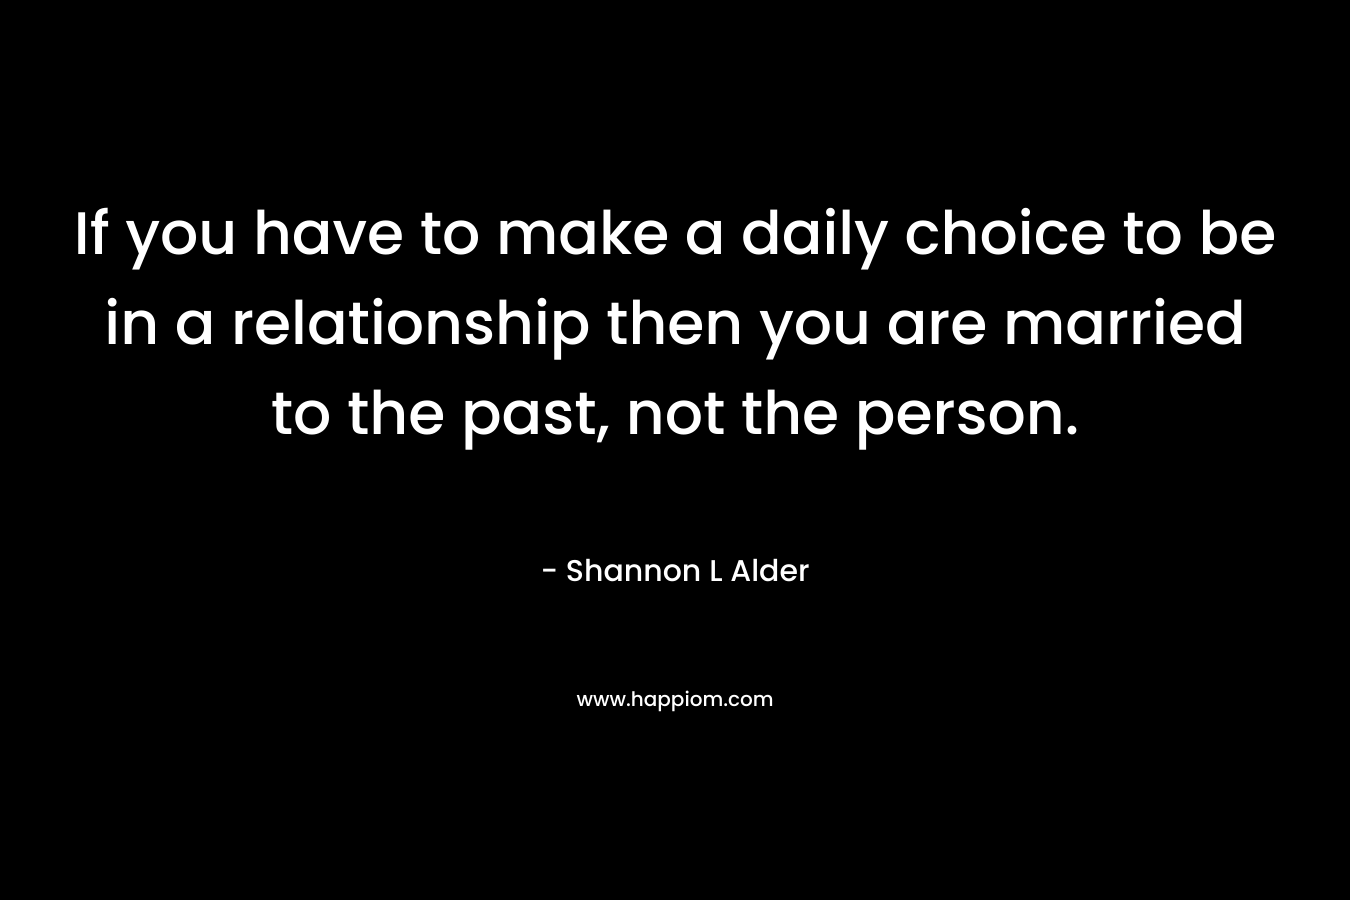 If you have to make a daily choice to be in a relationship then you are married to the past, not the person.